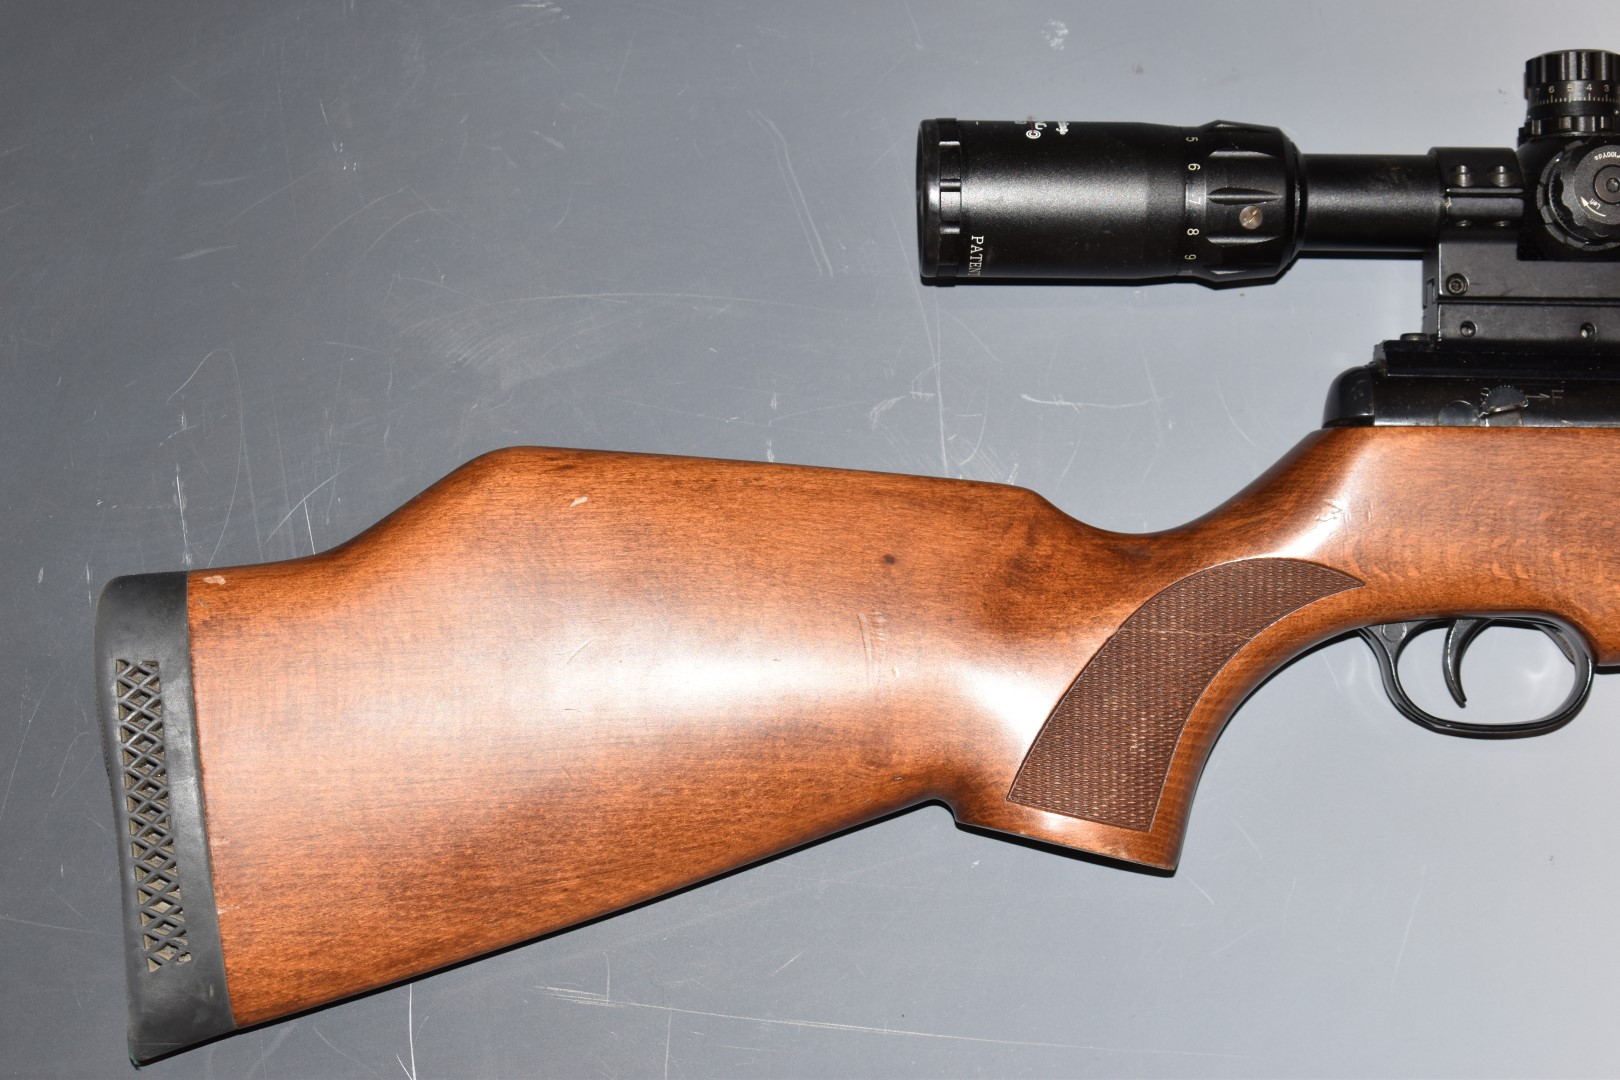 BSA .22 air rifle with chequered semi-pistol grip and forend, raised cheek piece, sound moderator - Image 3 of 10